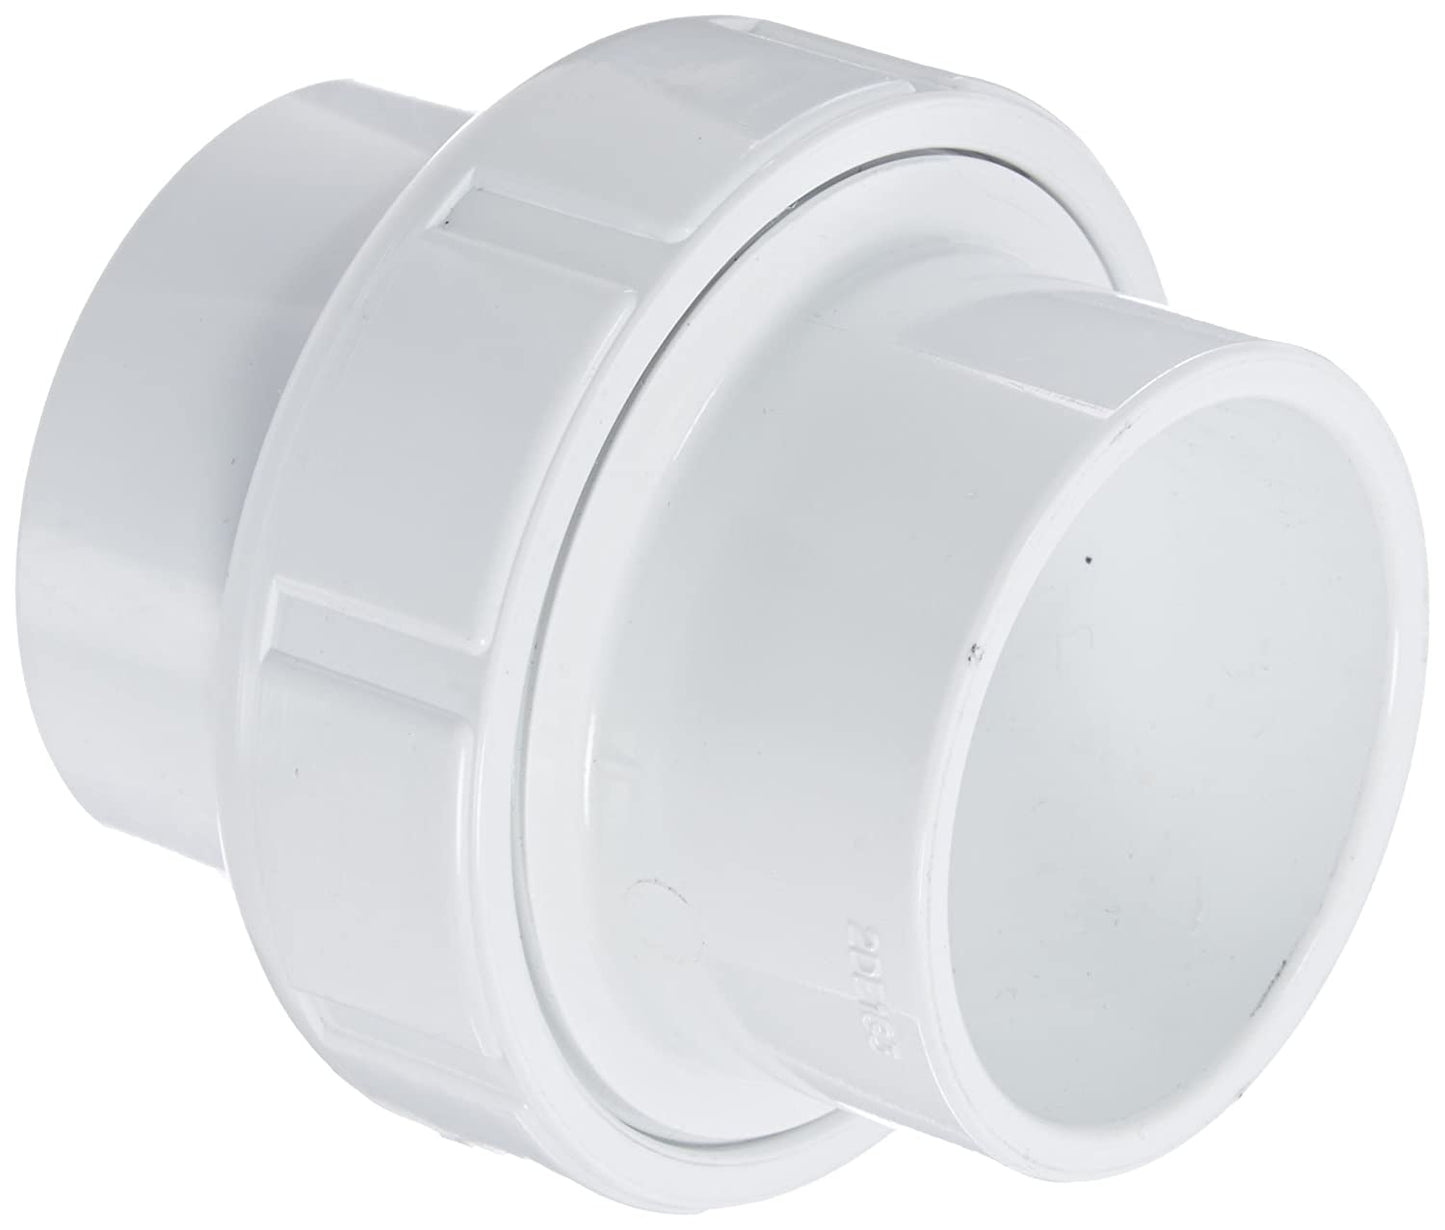 457-015 - PVC Pipe Fitting, Union with Buna O-Ring, Schedule 40, 1-1/2" Socket